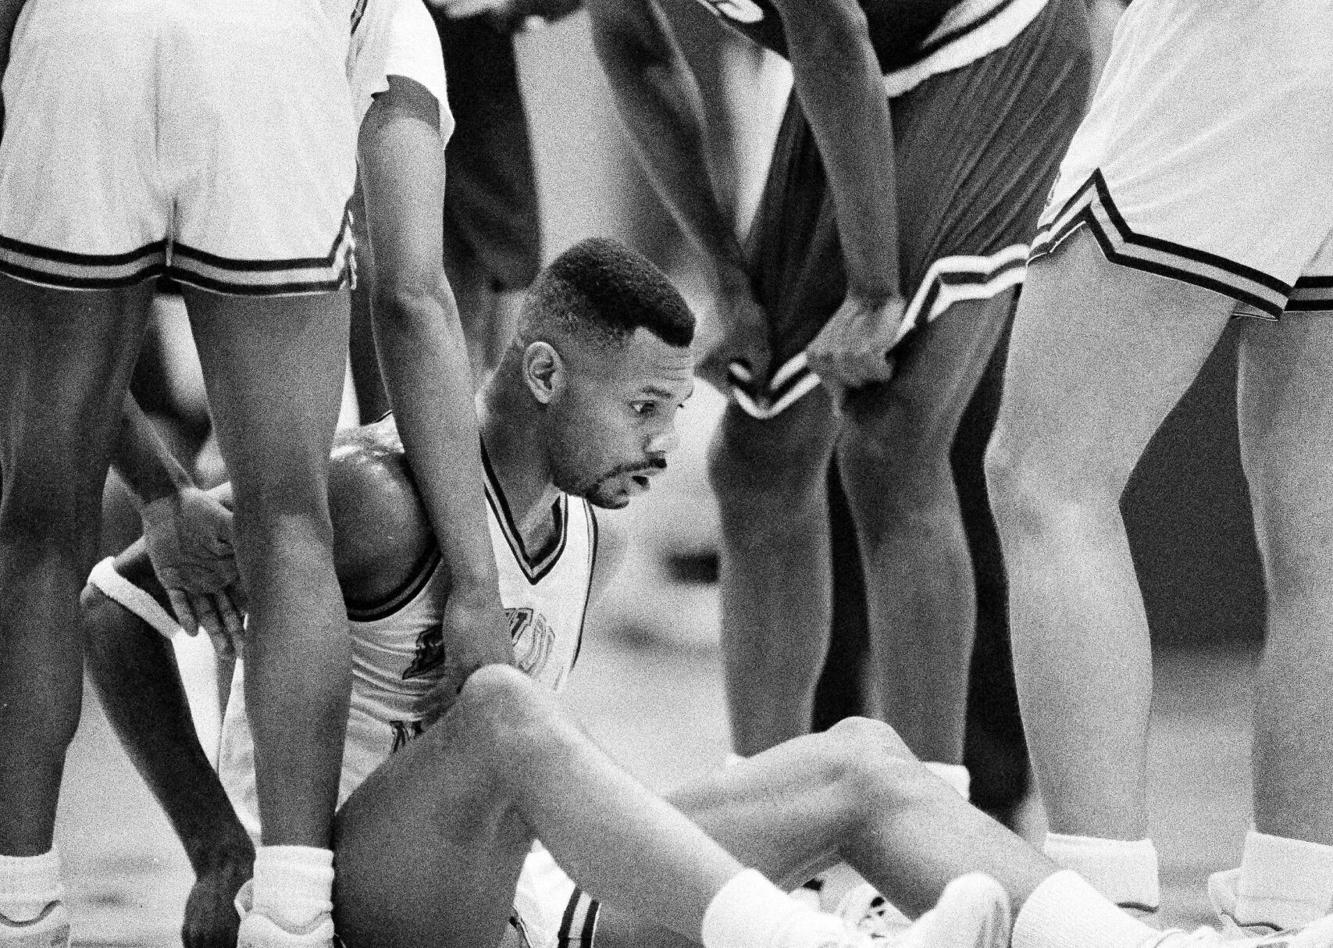 Today in sports history: Hank Gathers 23 dies after collapsing during